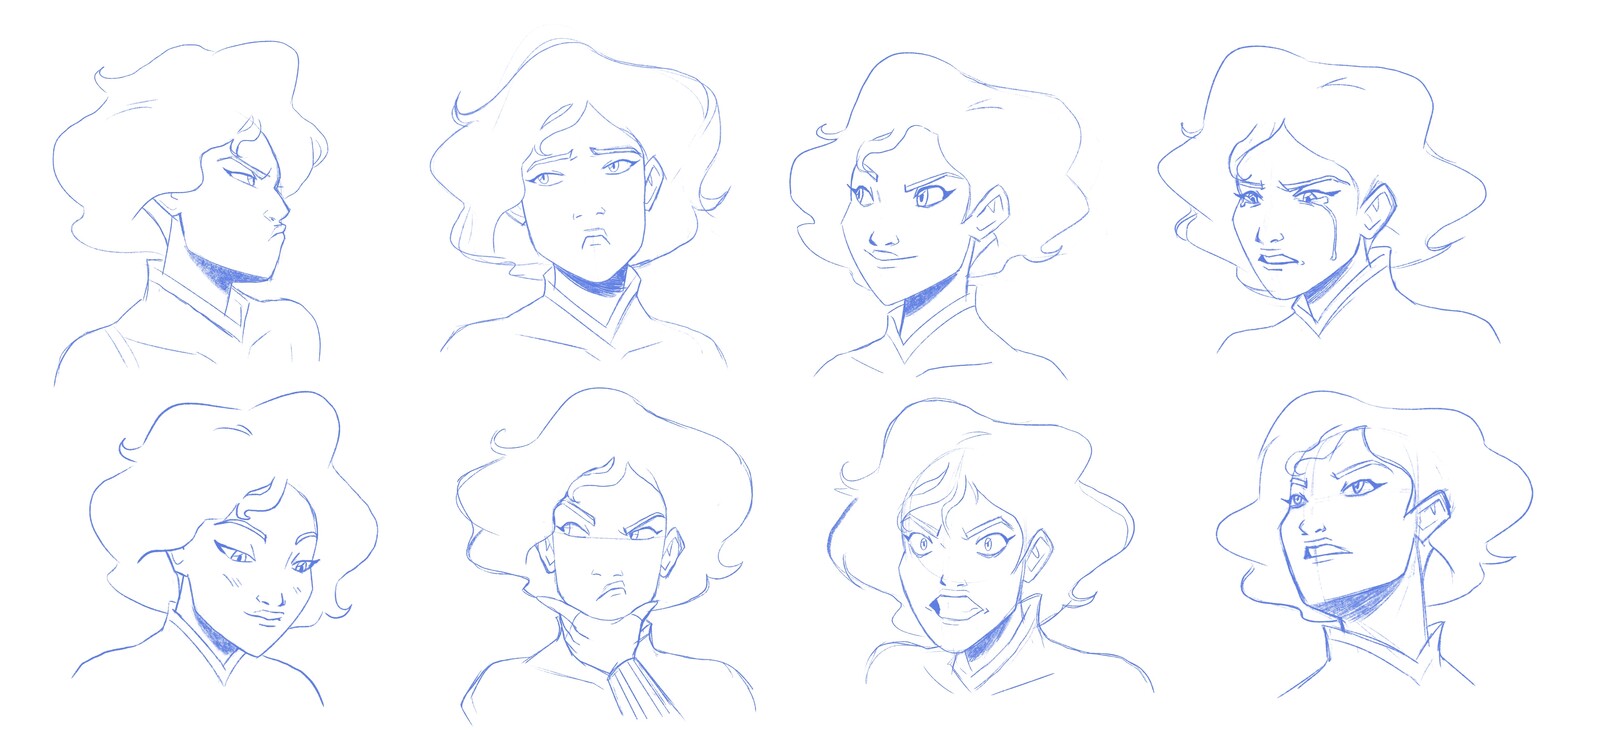 Ro’s Expression Sheet